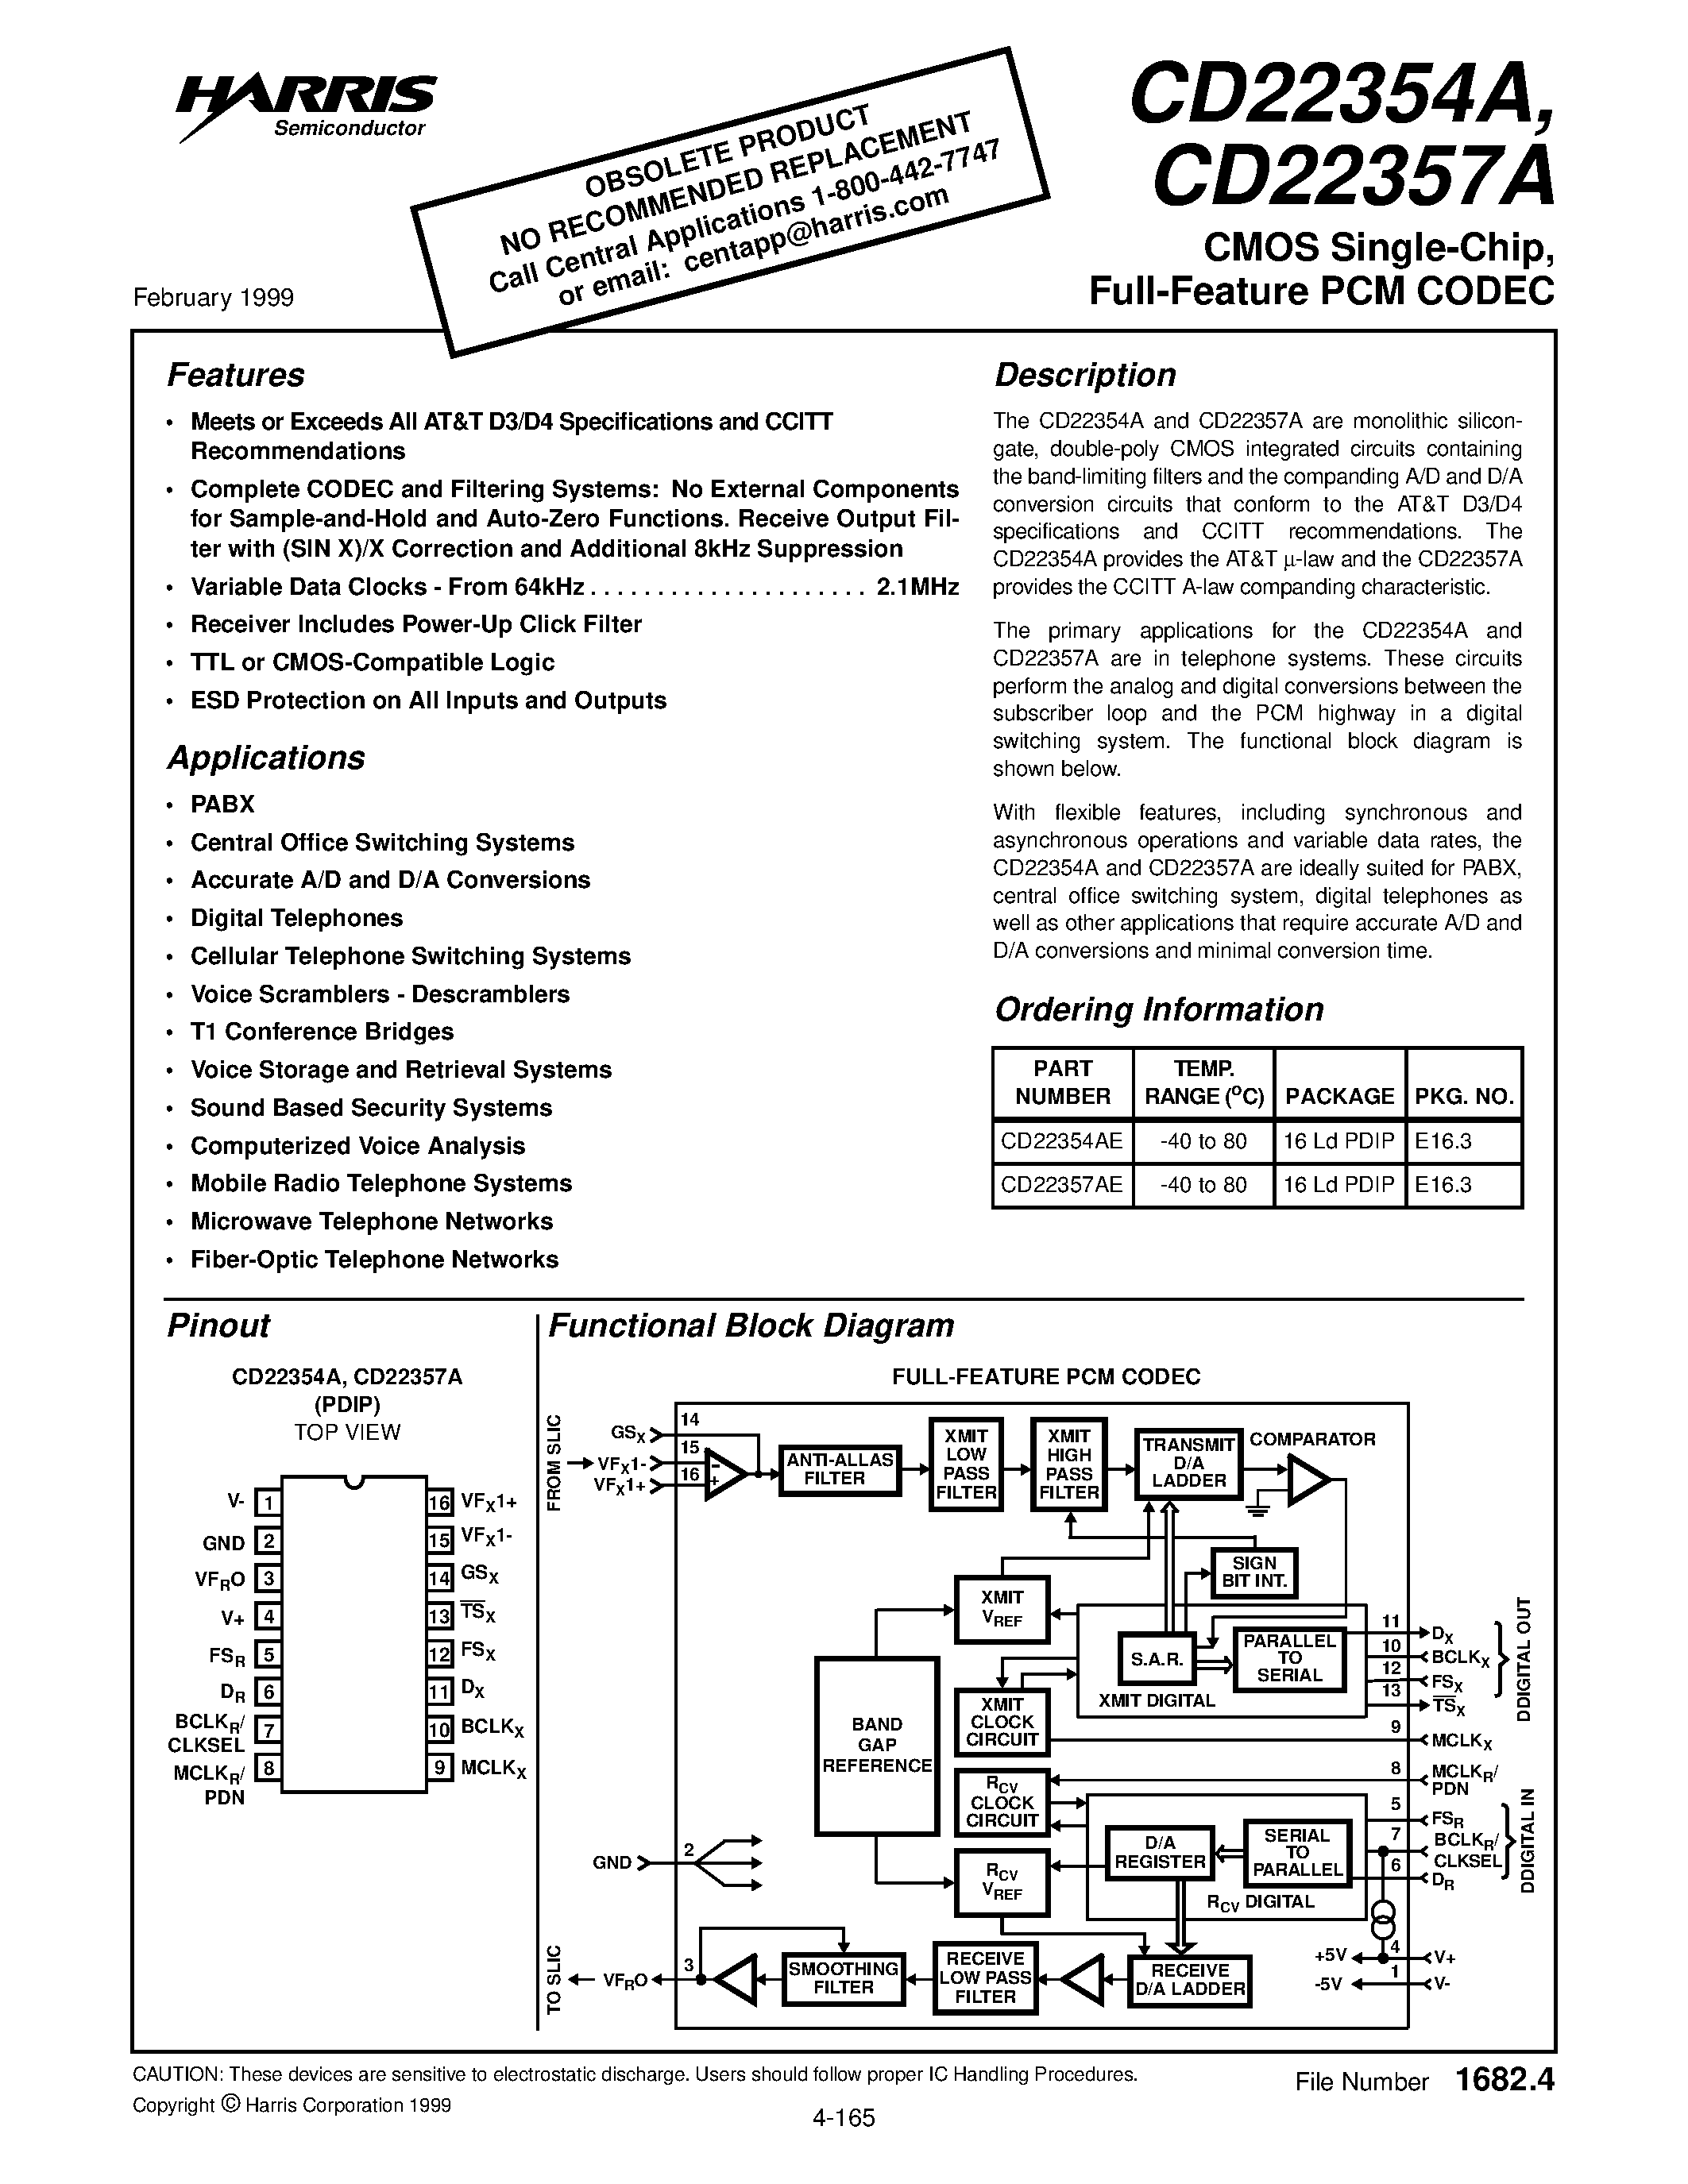 Datasheet CD22357A - CMOS Single-Chip/ Full-Feature PCM CODEC page 1